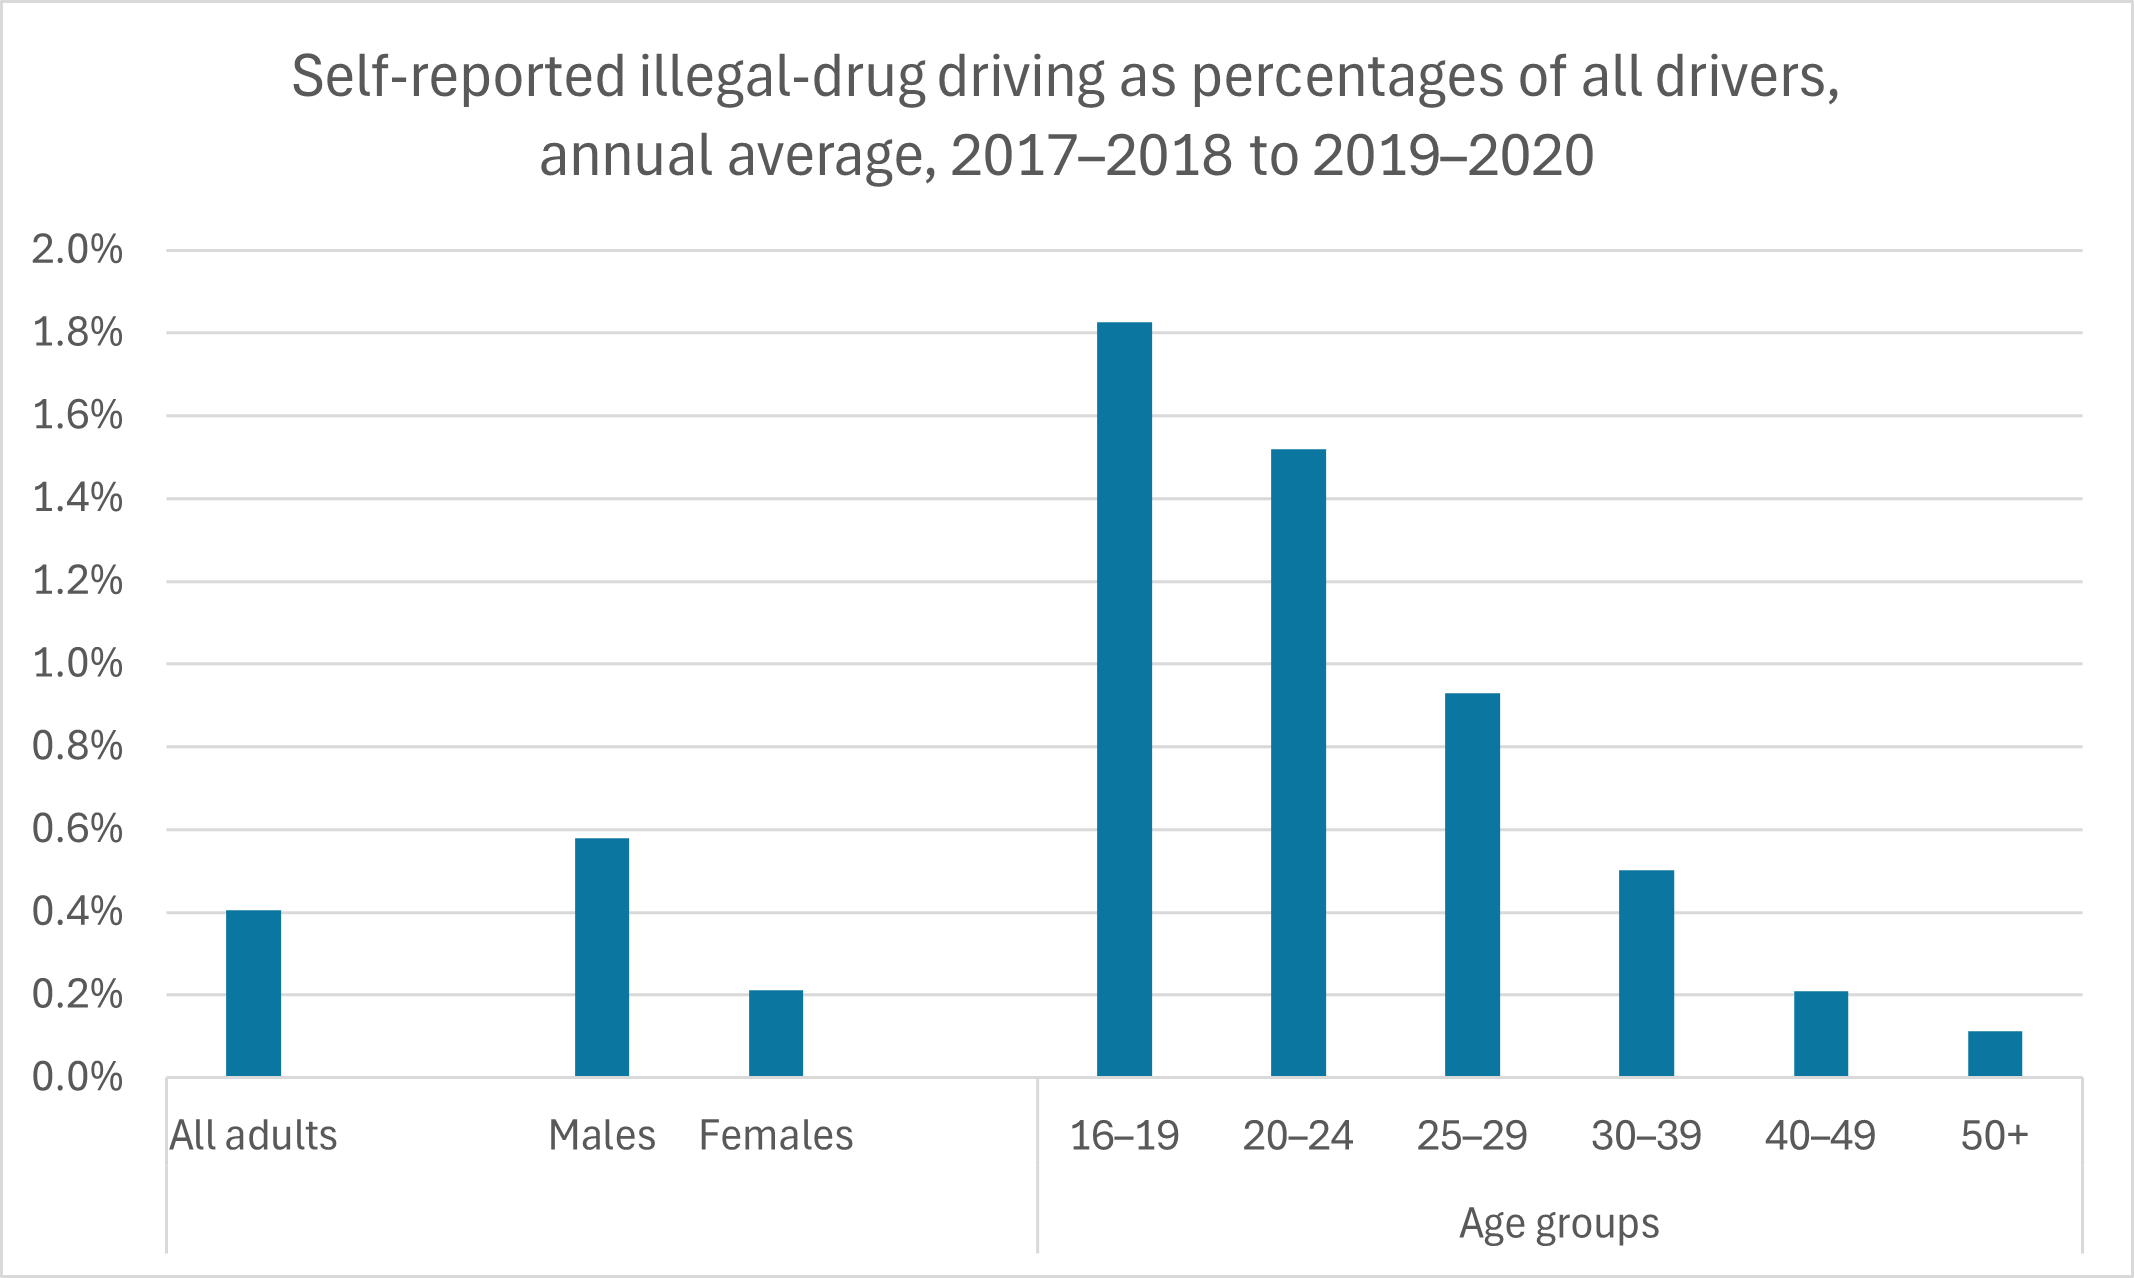 Self-reported drug driving by age and gender